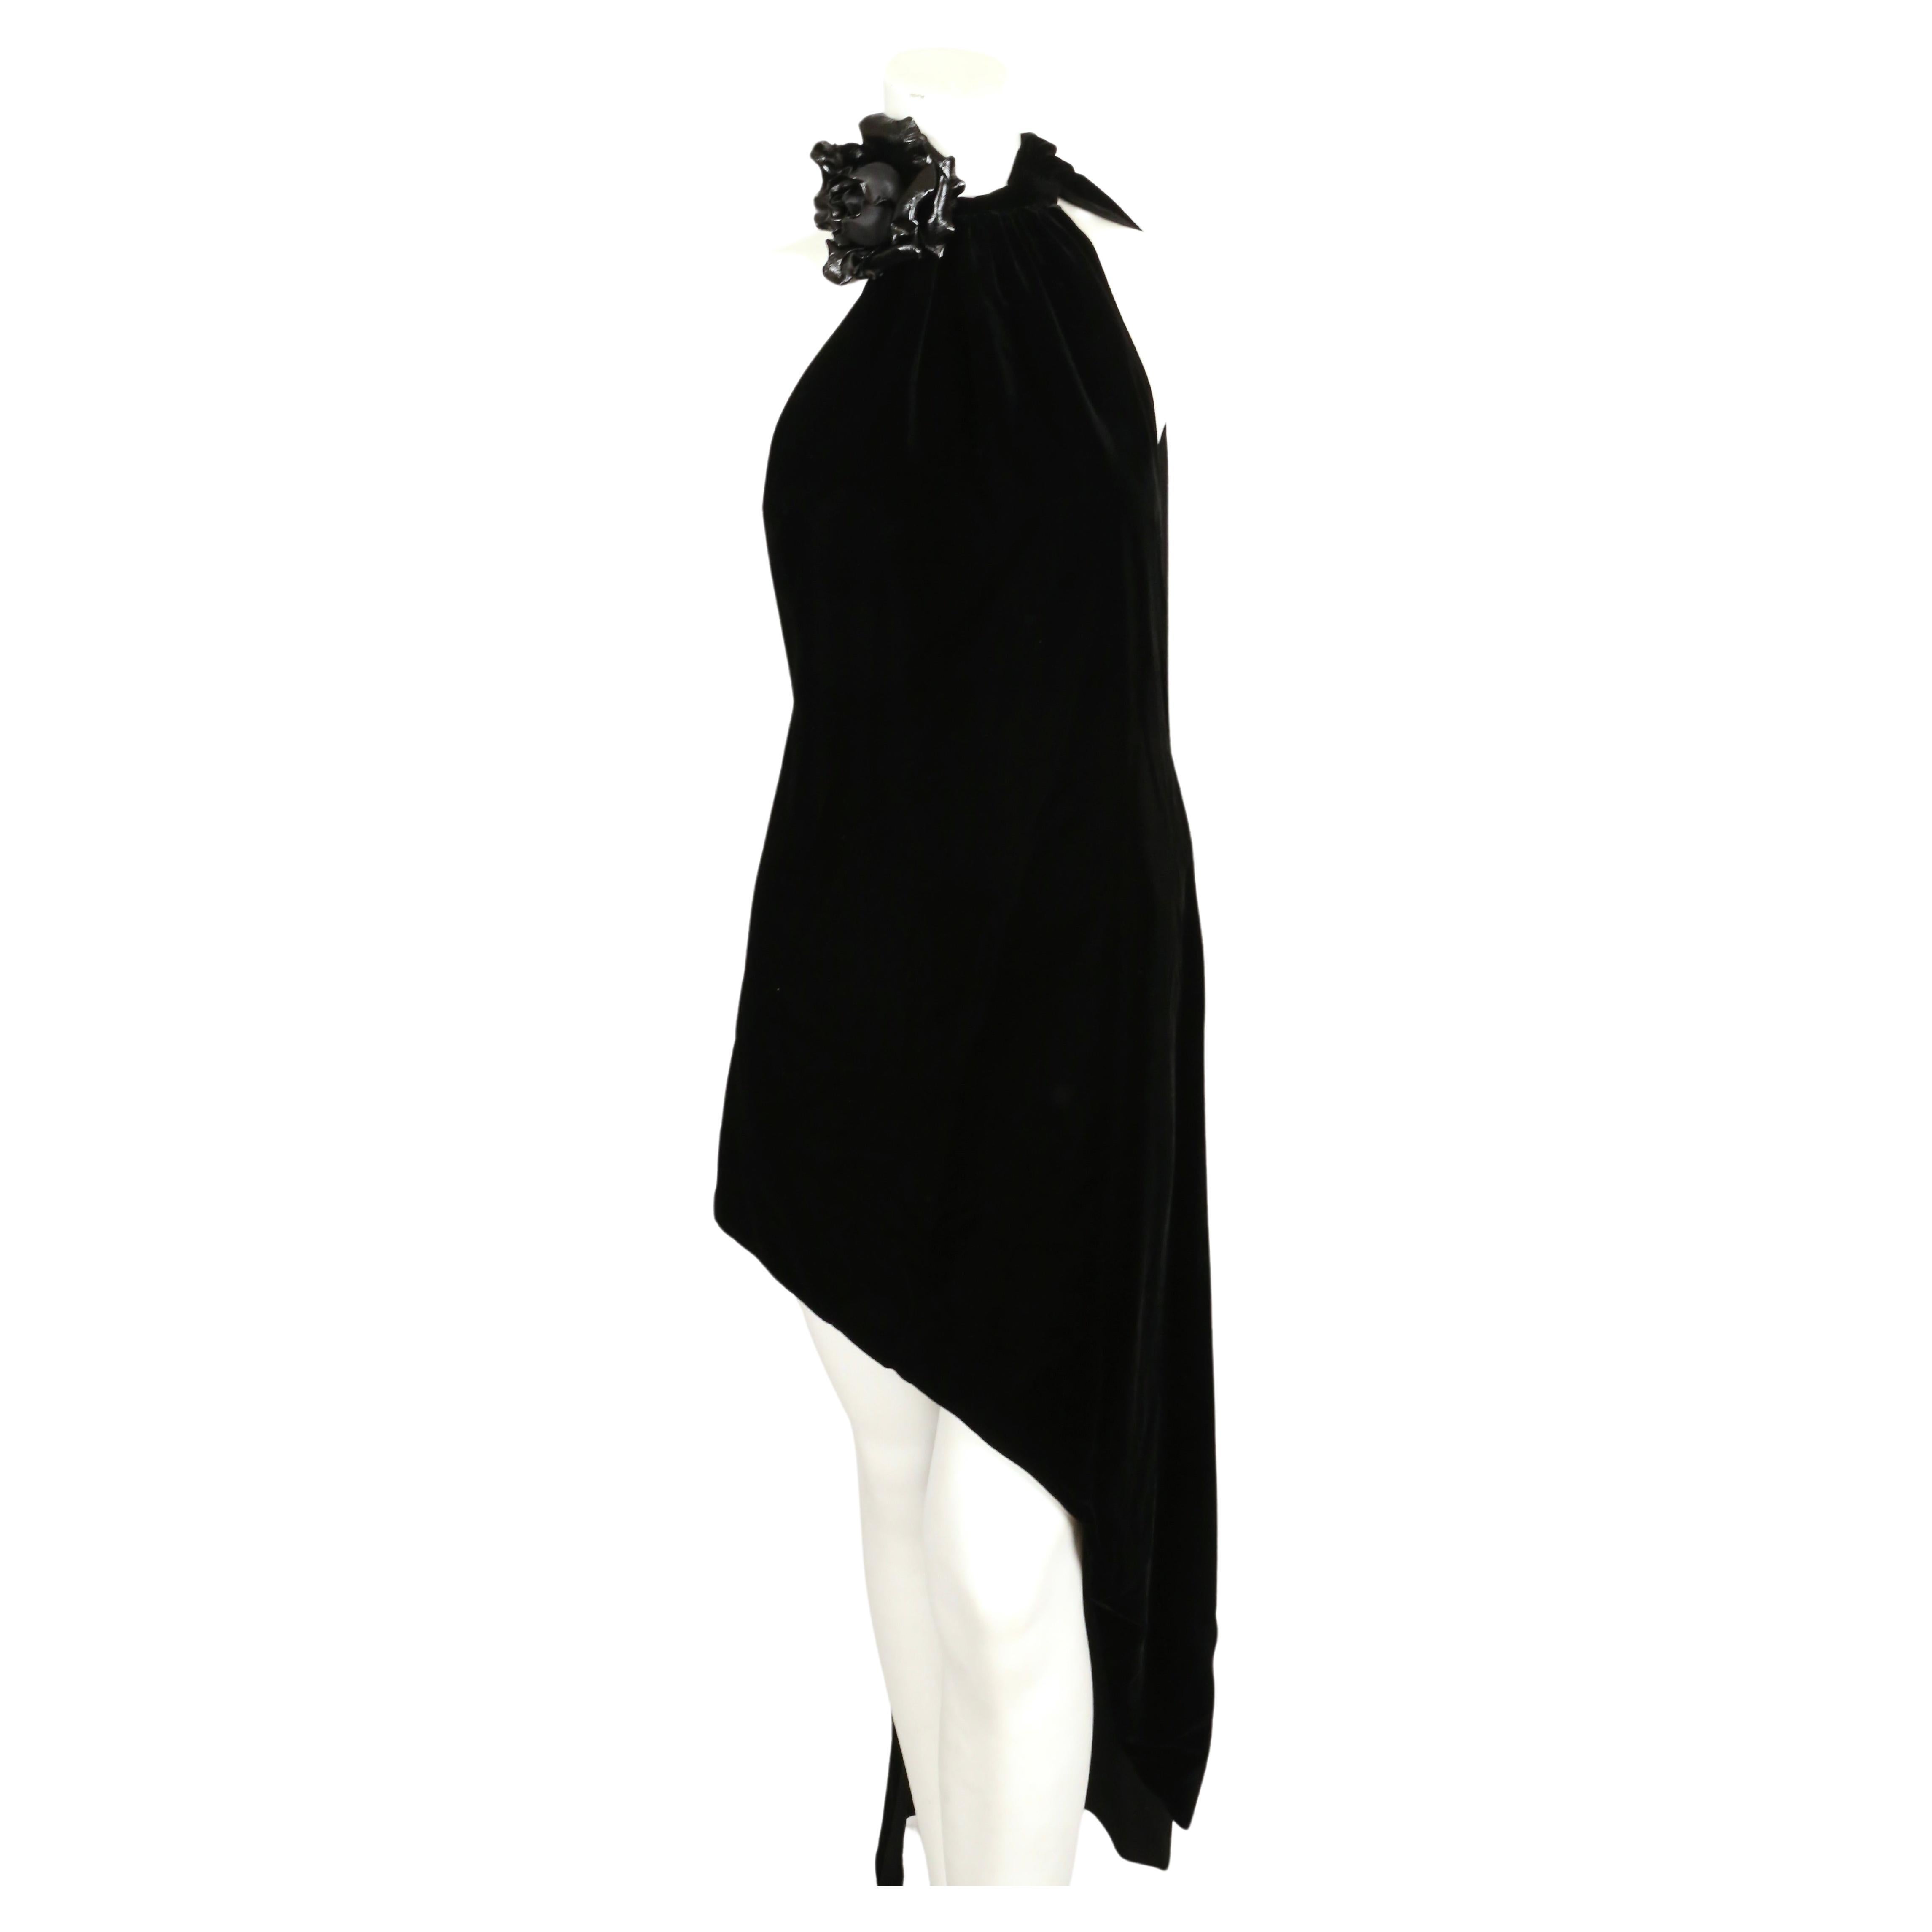 Dramatic, jet black velvet dress with long attached scarf and rose brooch detail designed by Anthony Vaccarello for Saint Laurent exactly as seen on the 2017 fall runway. Dress can be worn with attached scarf worn in the front or the back. Dress is